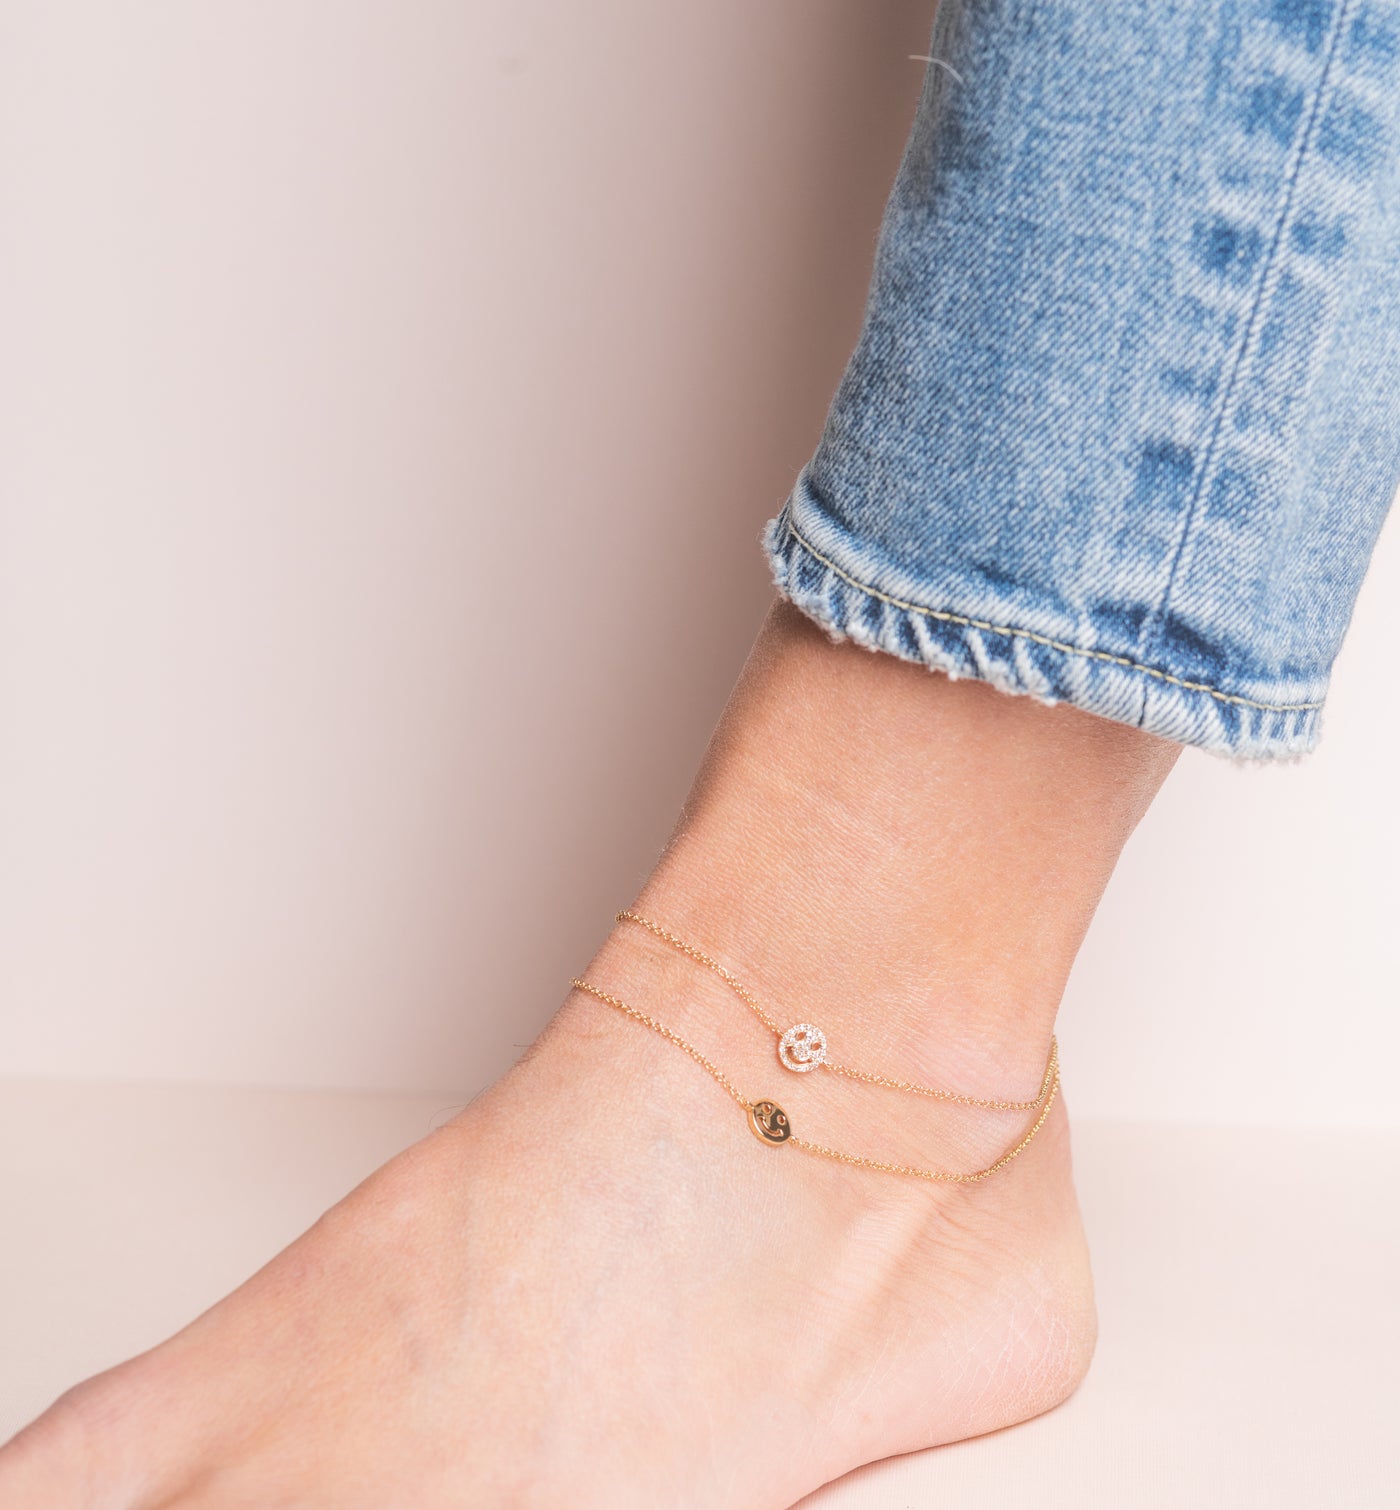 Smiley Face Anklet with Diamond Detail